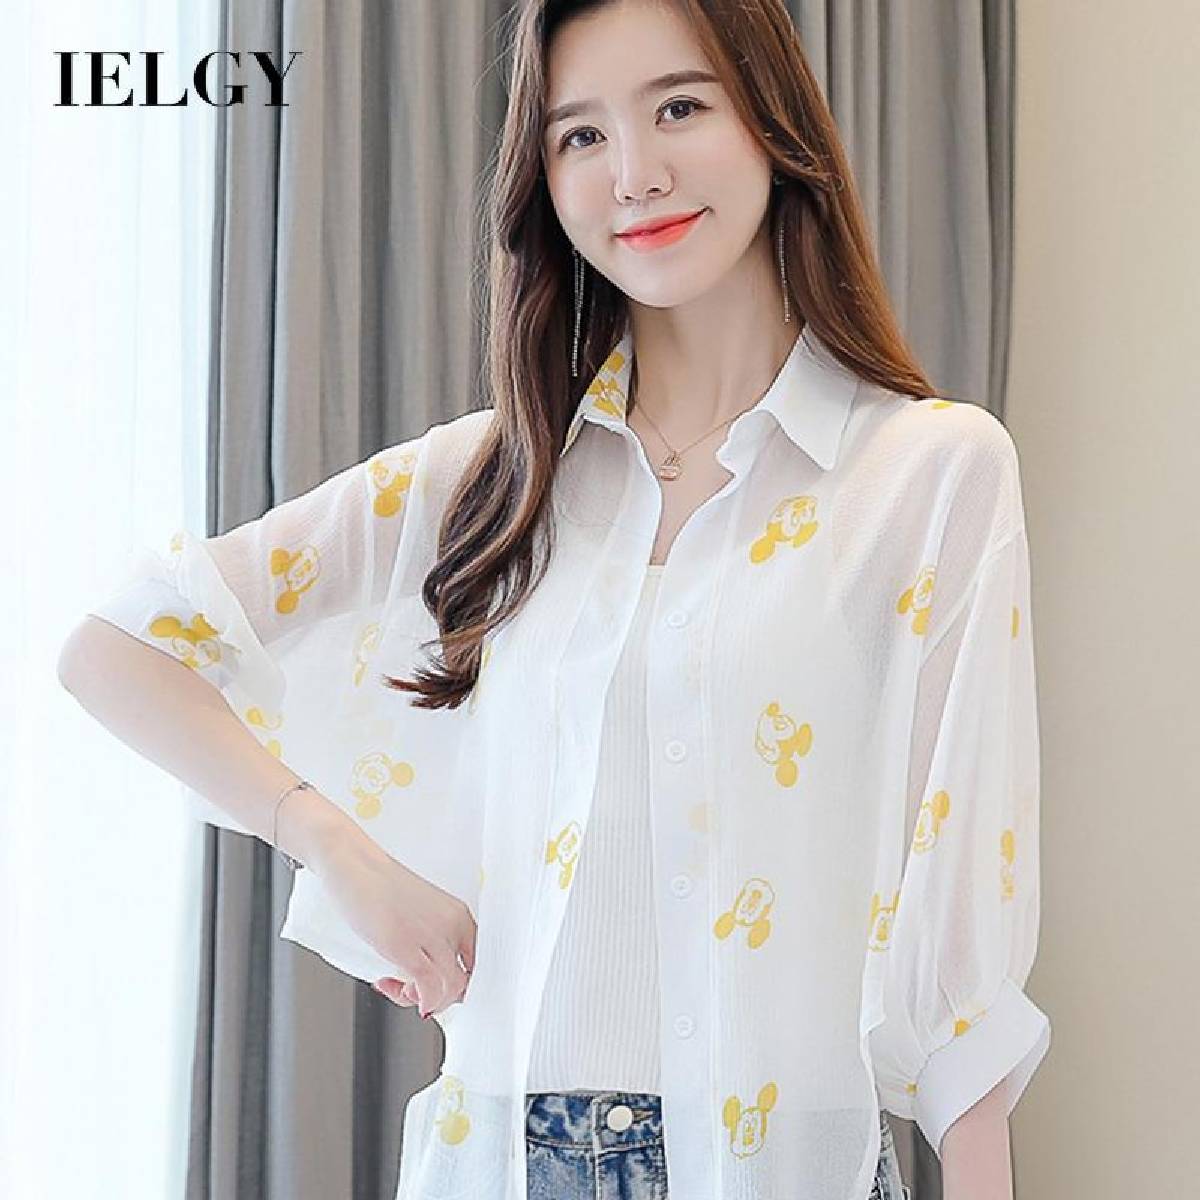 IELGY Coat Ice silk Long sleeves Sunscreen Chiffon shirt Korean style Outfit  Western style Women's clothing Lightweight: Buy Online at Best Prices in  Pakistan 